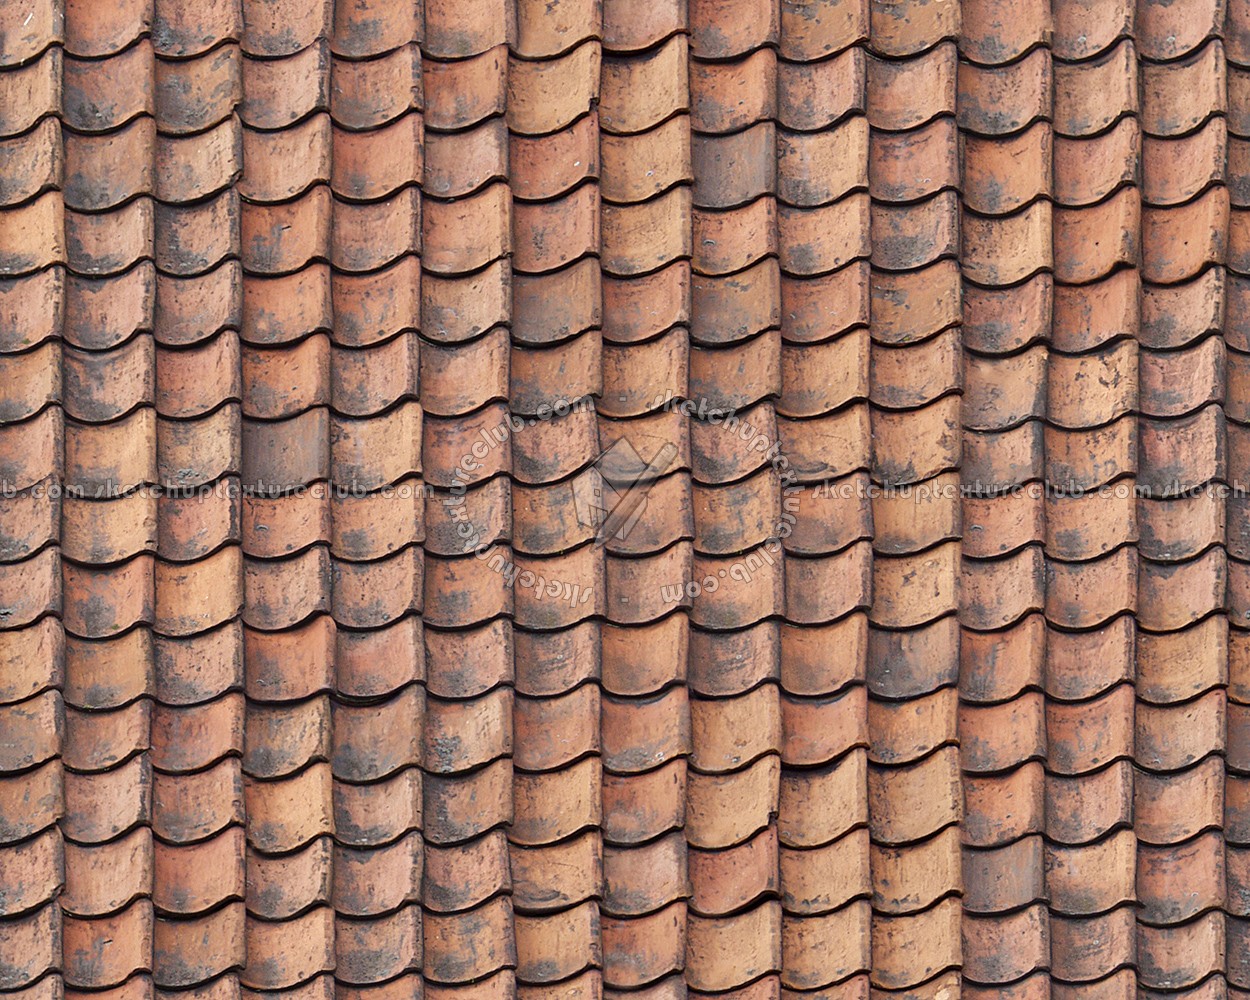 Dirty Clay Roofing Texture Seamless 03397